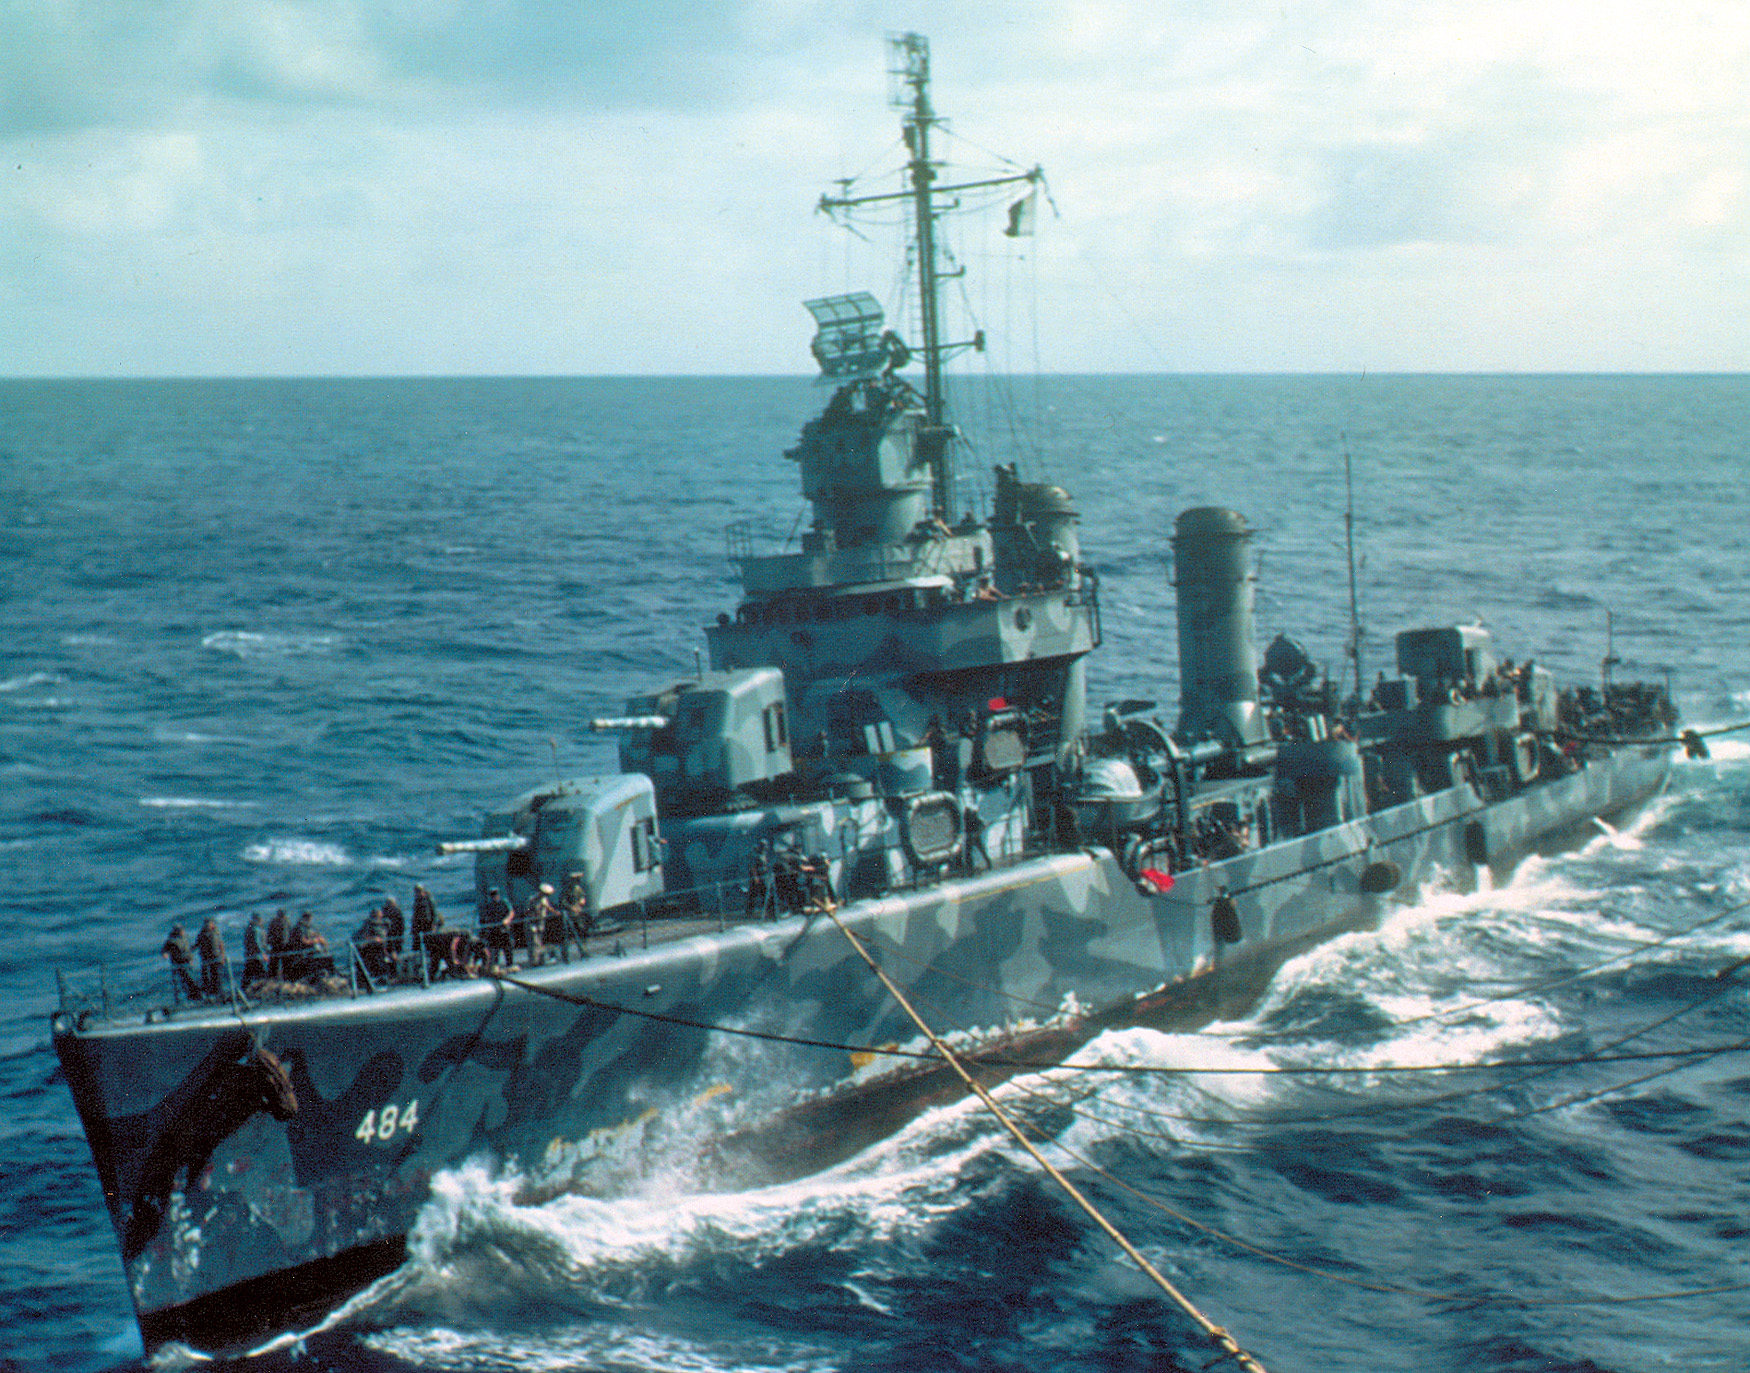 The USS Buchanan. This destroyer was in the thick of the fight and suffered loss from friendly fire.